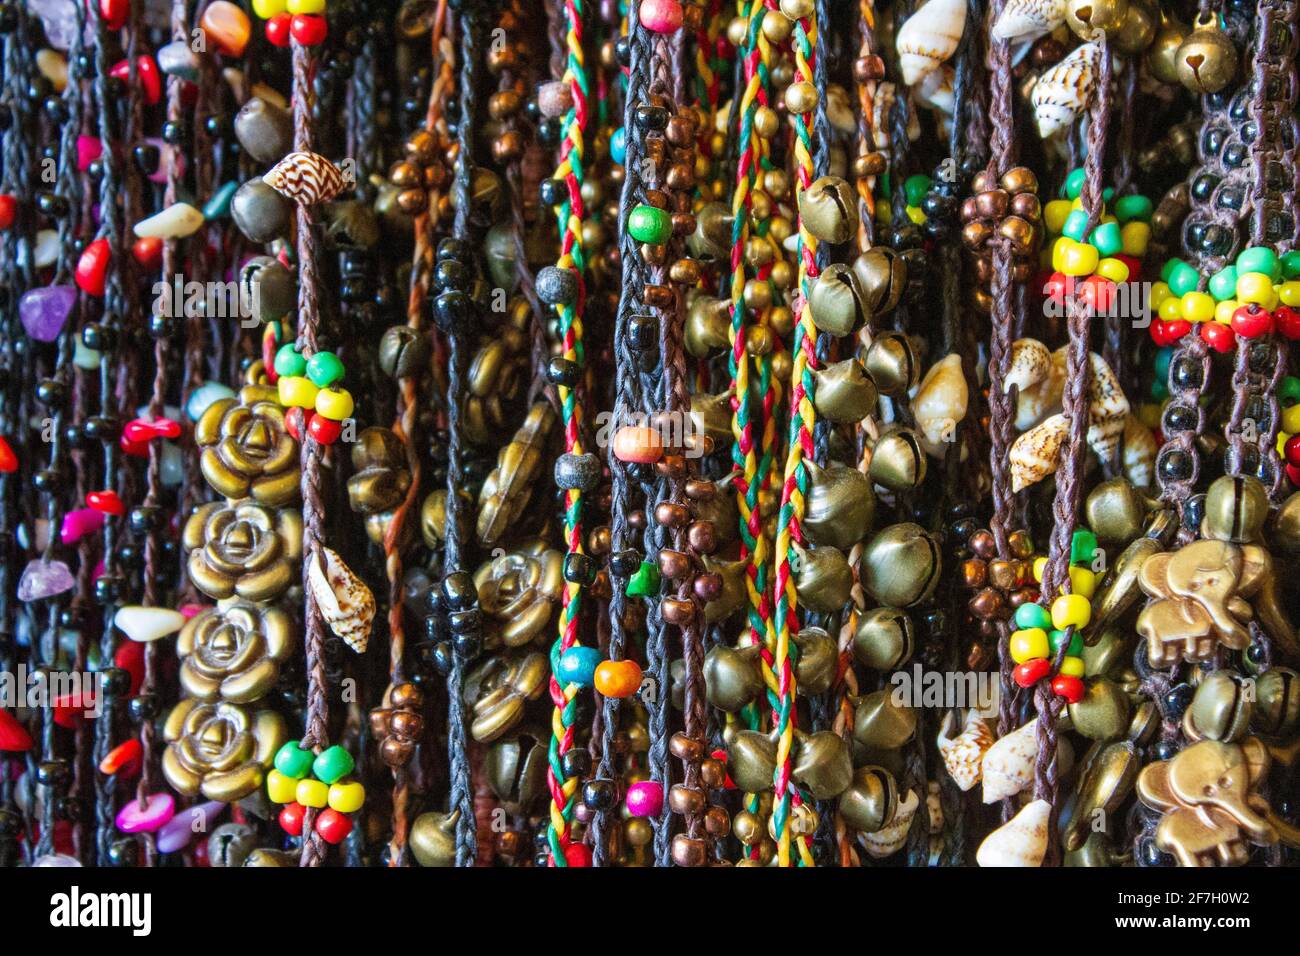 An assortment of costume silver jewelry in the Central Market in Phnom Penh, Camboda Stock Photo